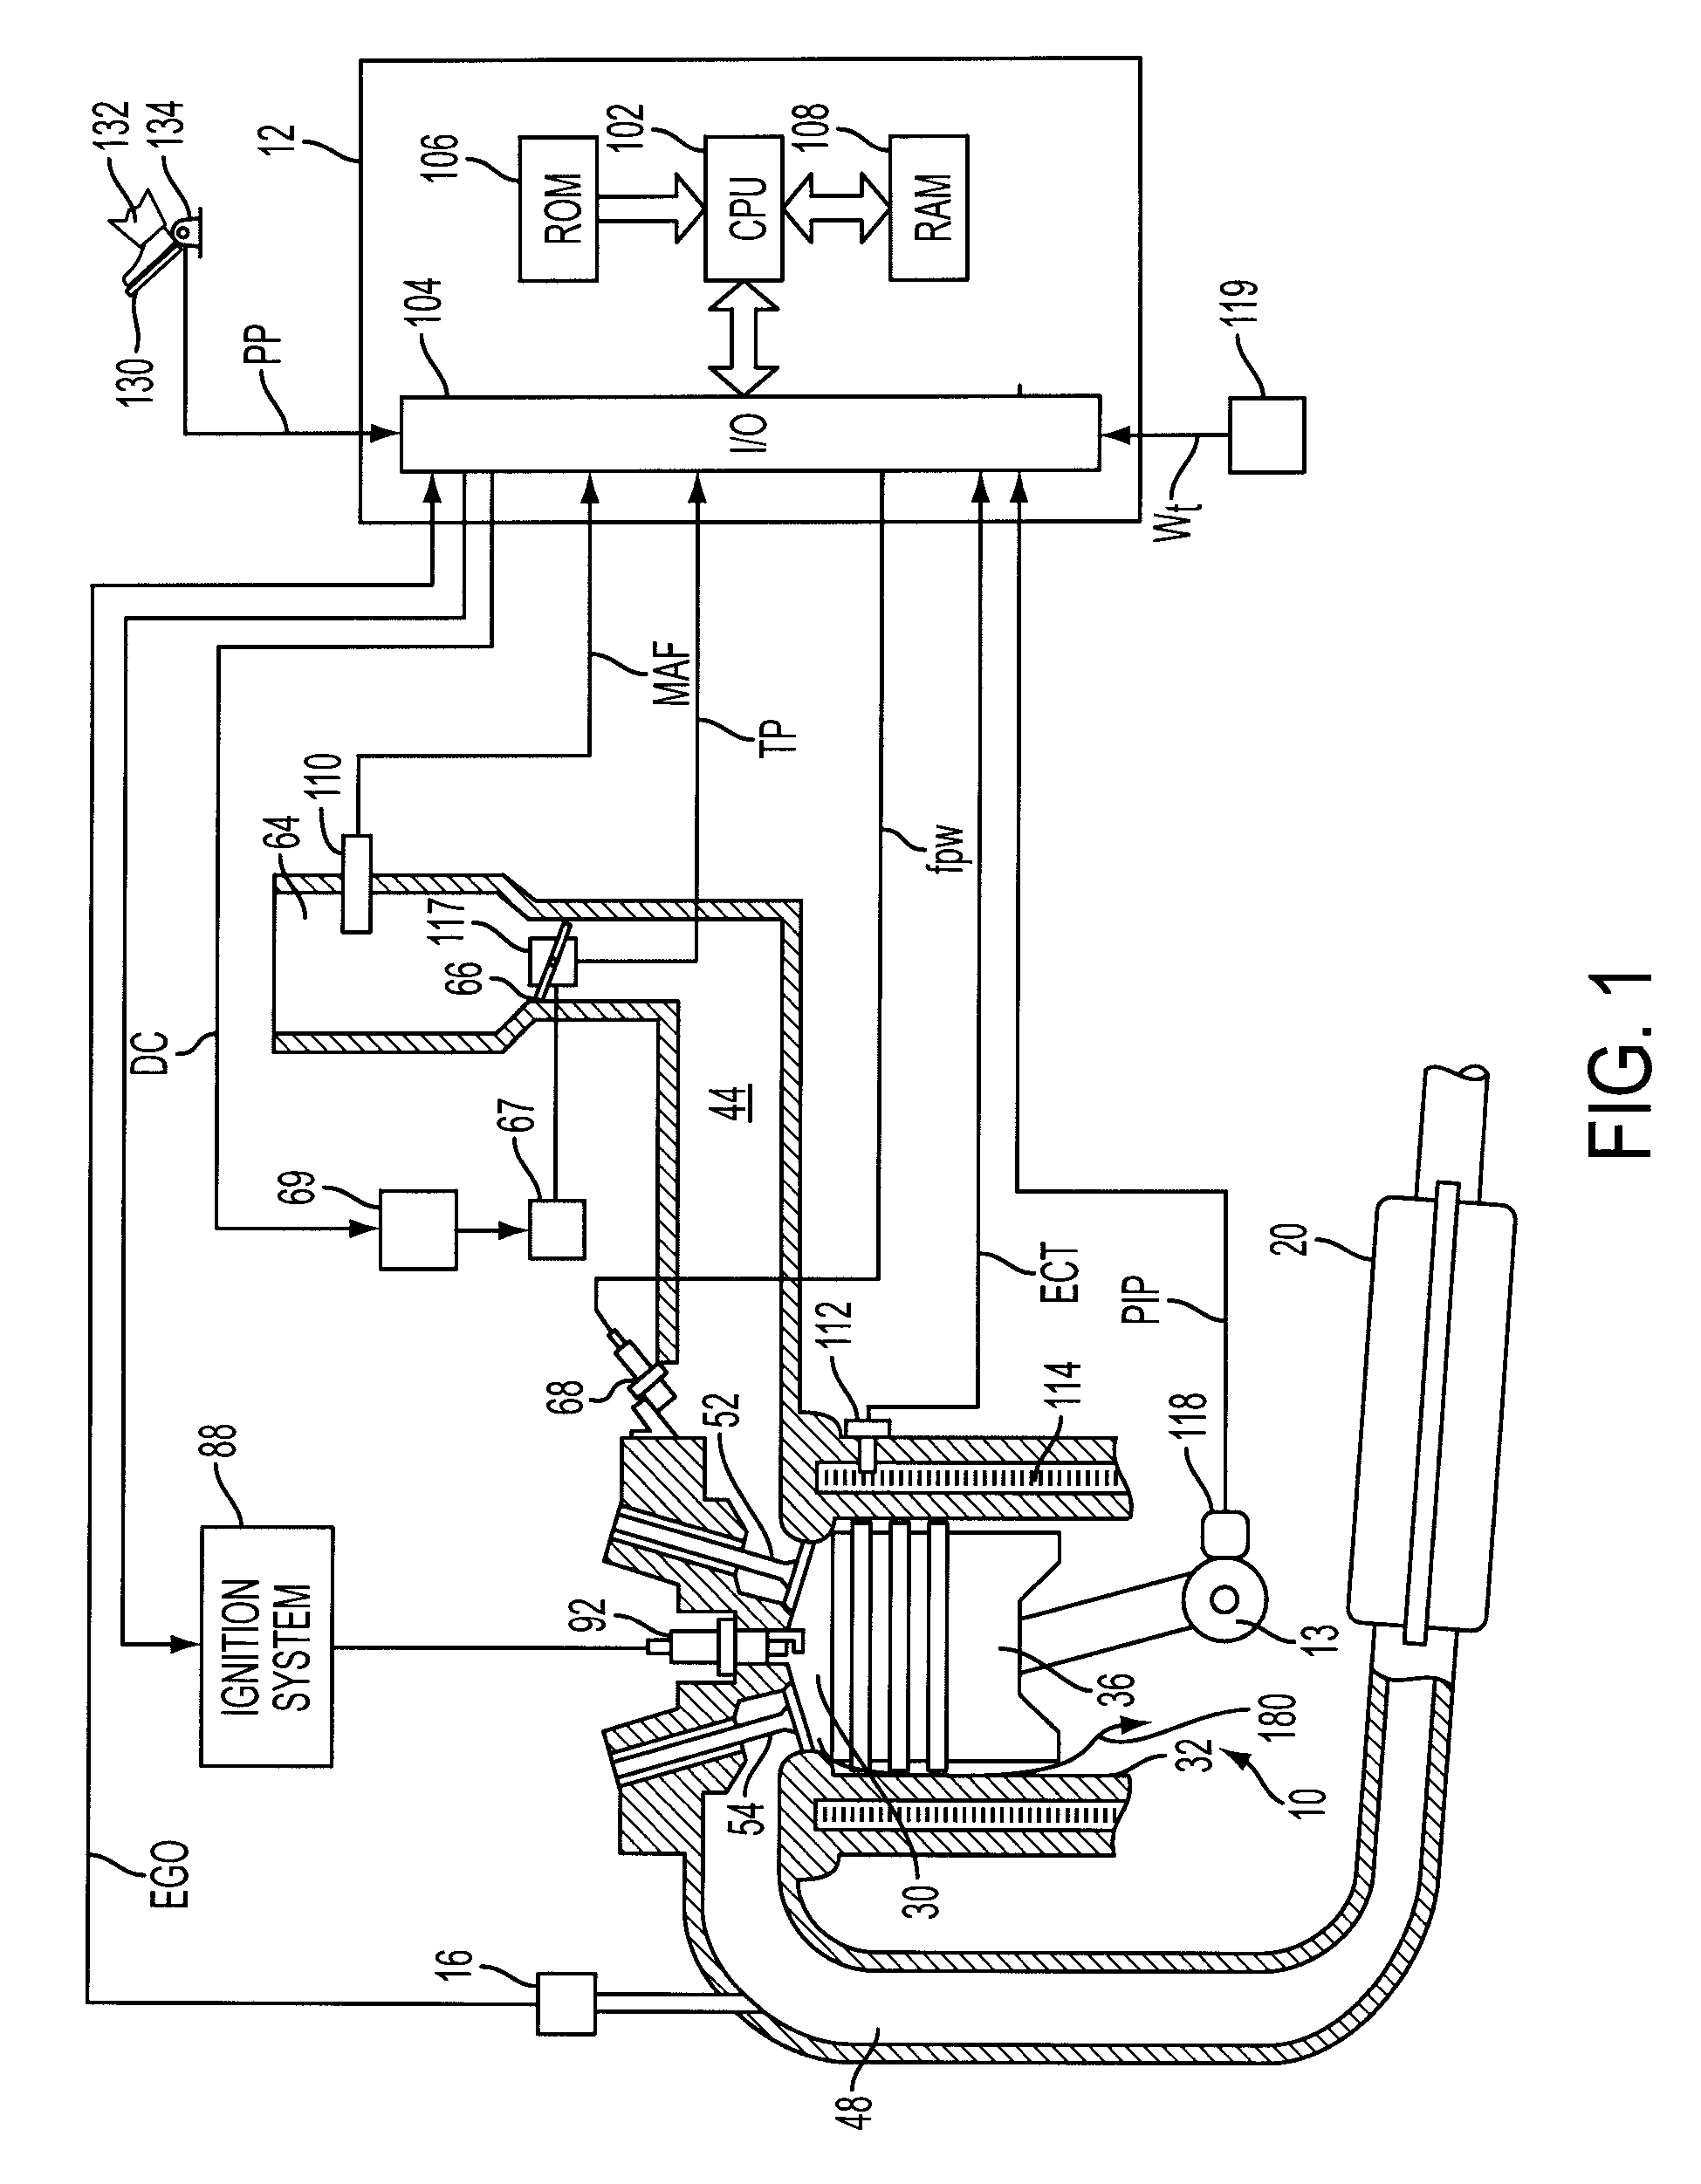 Cold Idle Adaptive Air-Fuel Ratio Control Utilizing Lost Fuel Approximation